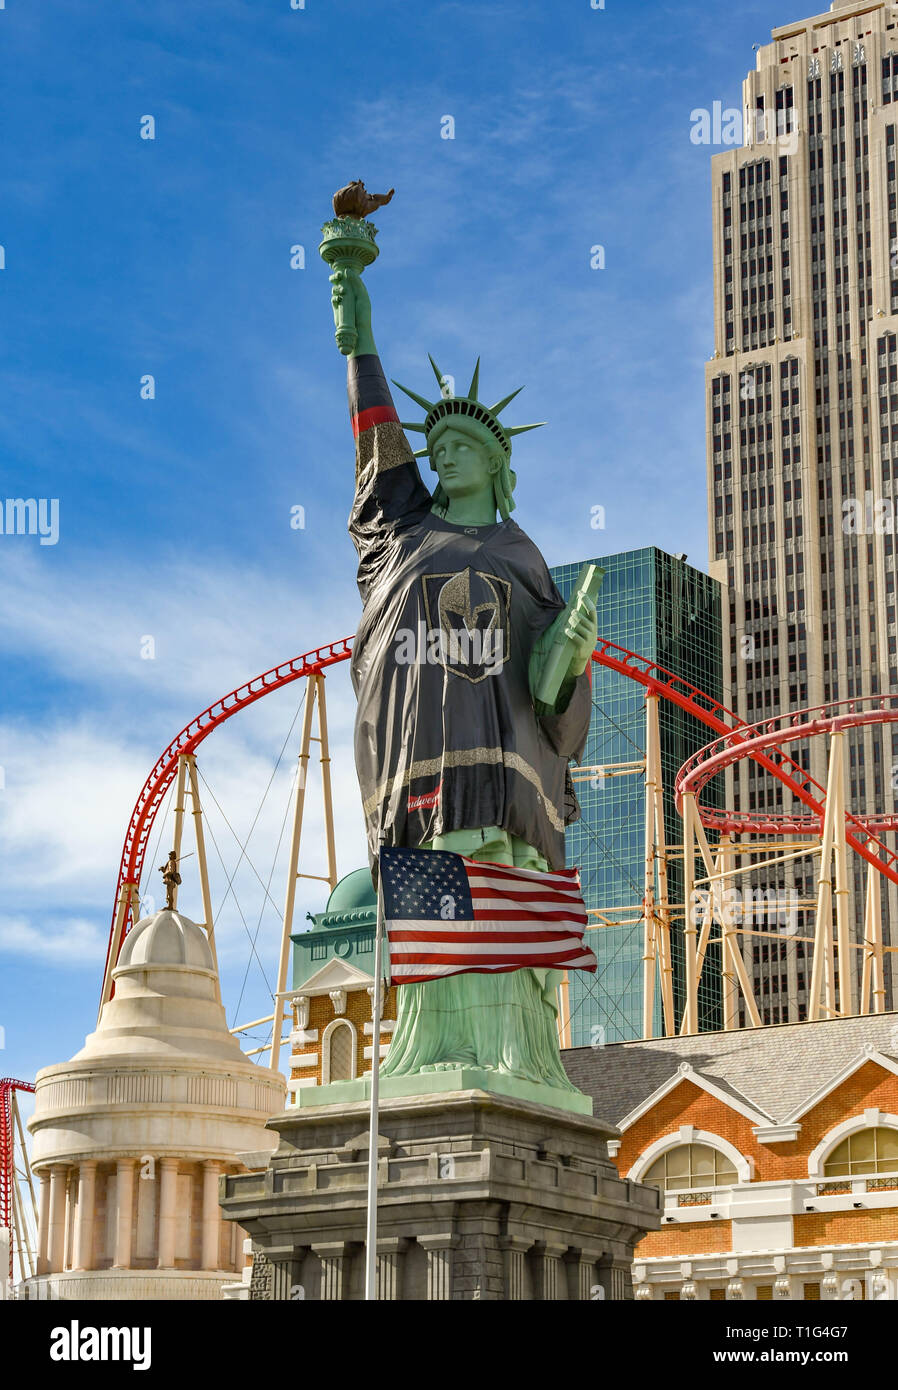 LAS VEGAS, NV, USA - FEBRUARY 2019: The replica Statue of Liberty outside the New York New York Hotel in Las Vegas. It is draped in the shirt of the G Stock Photo